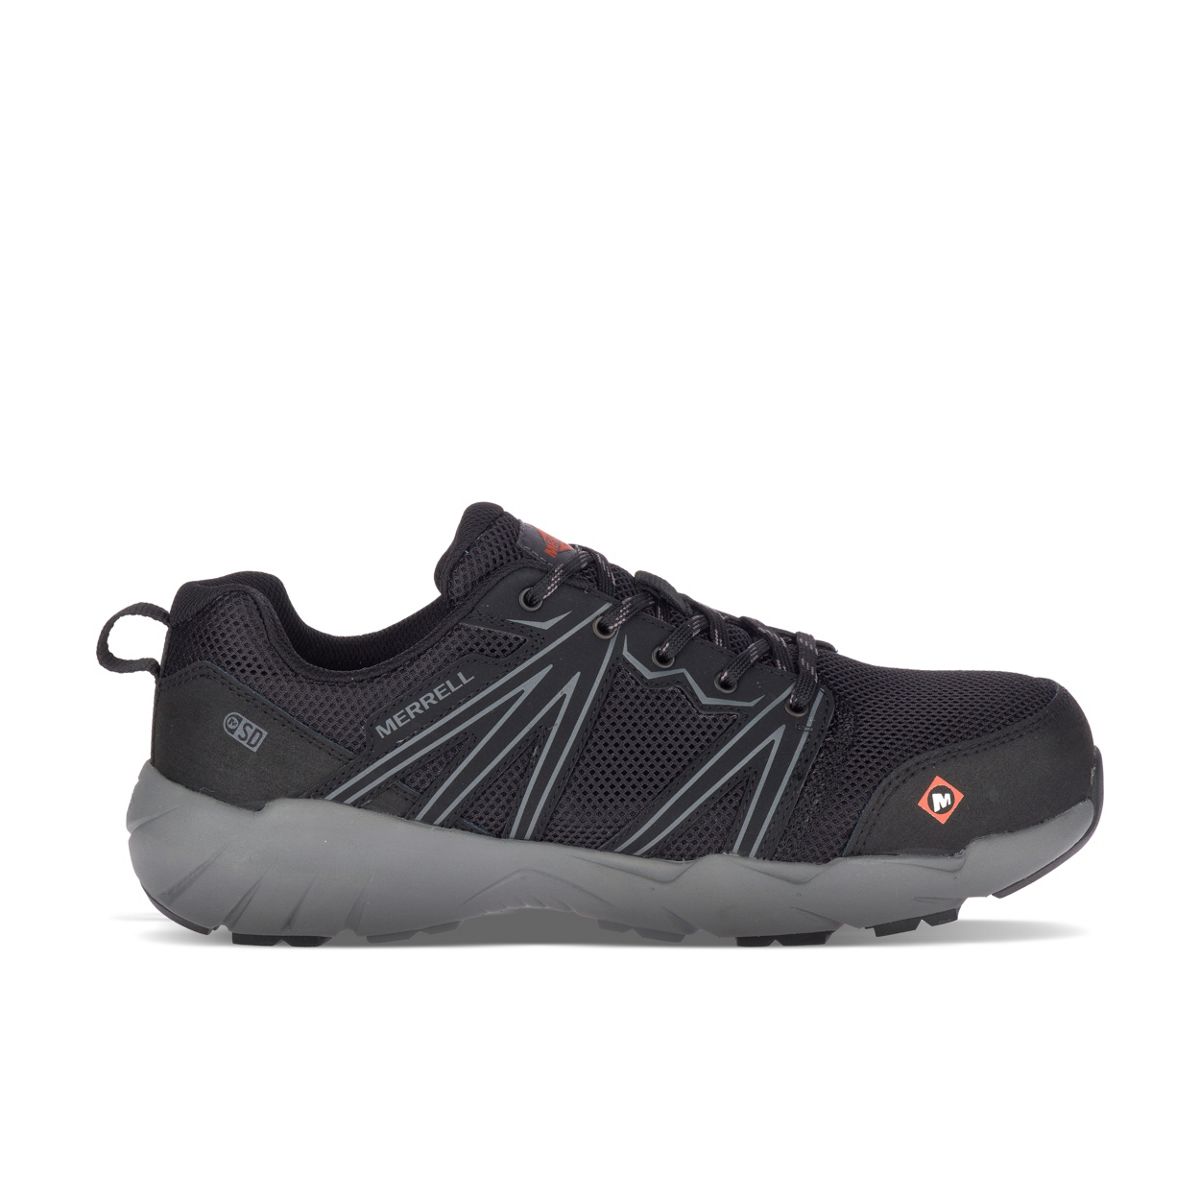 merrell safety shoes